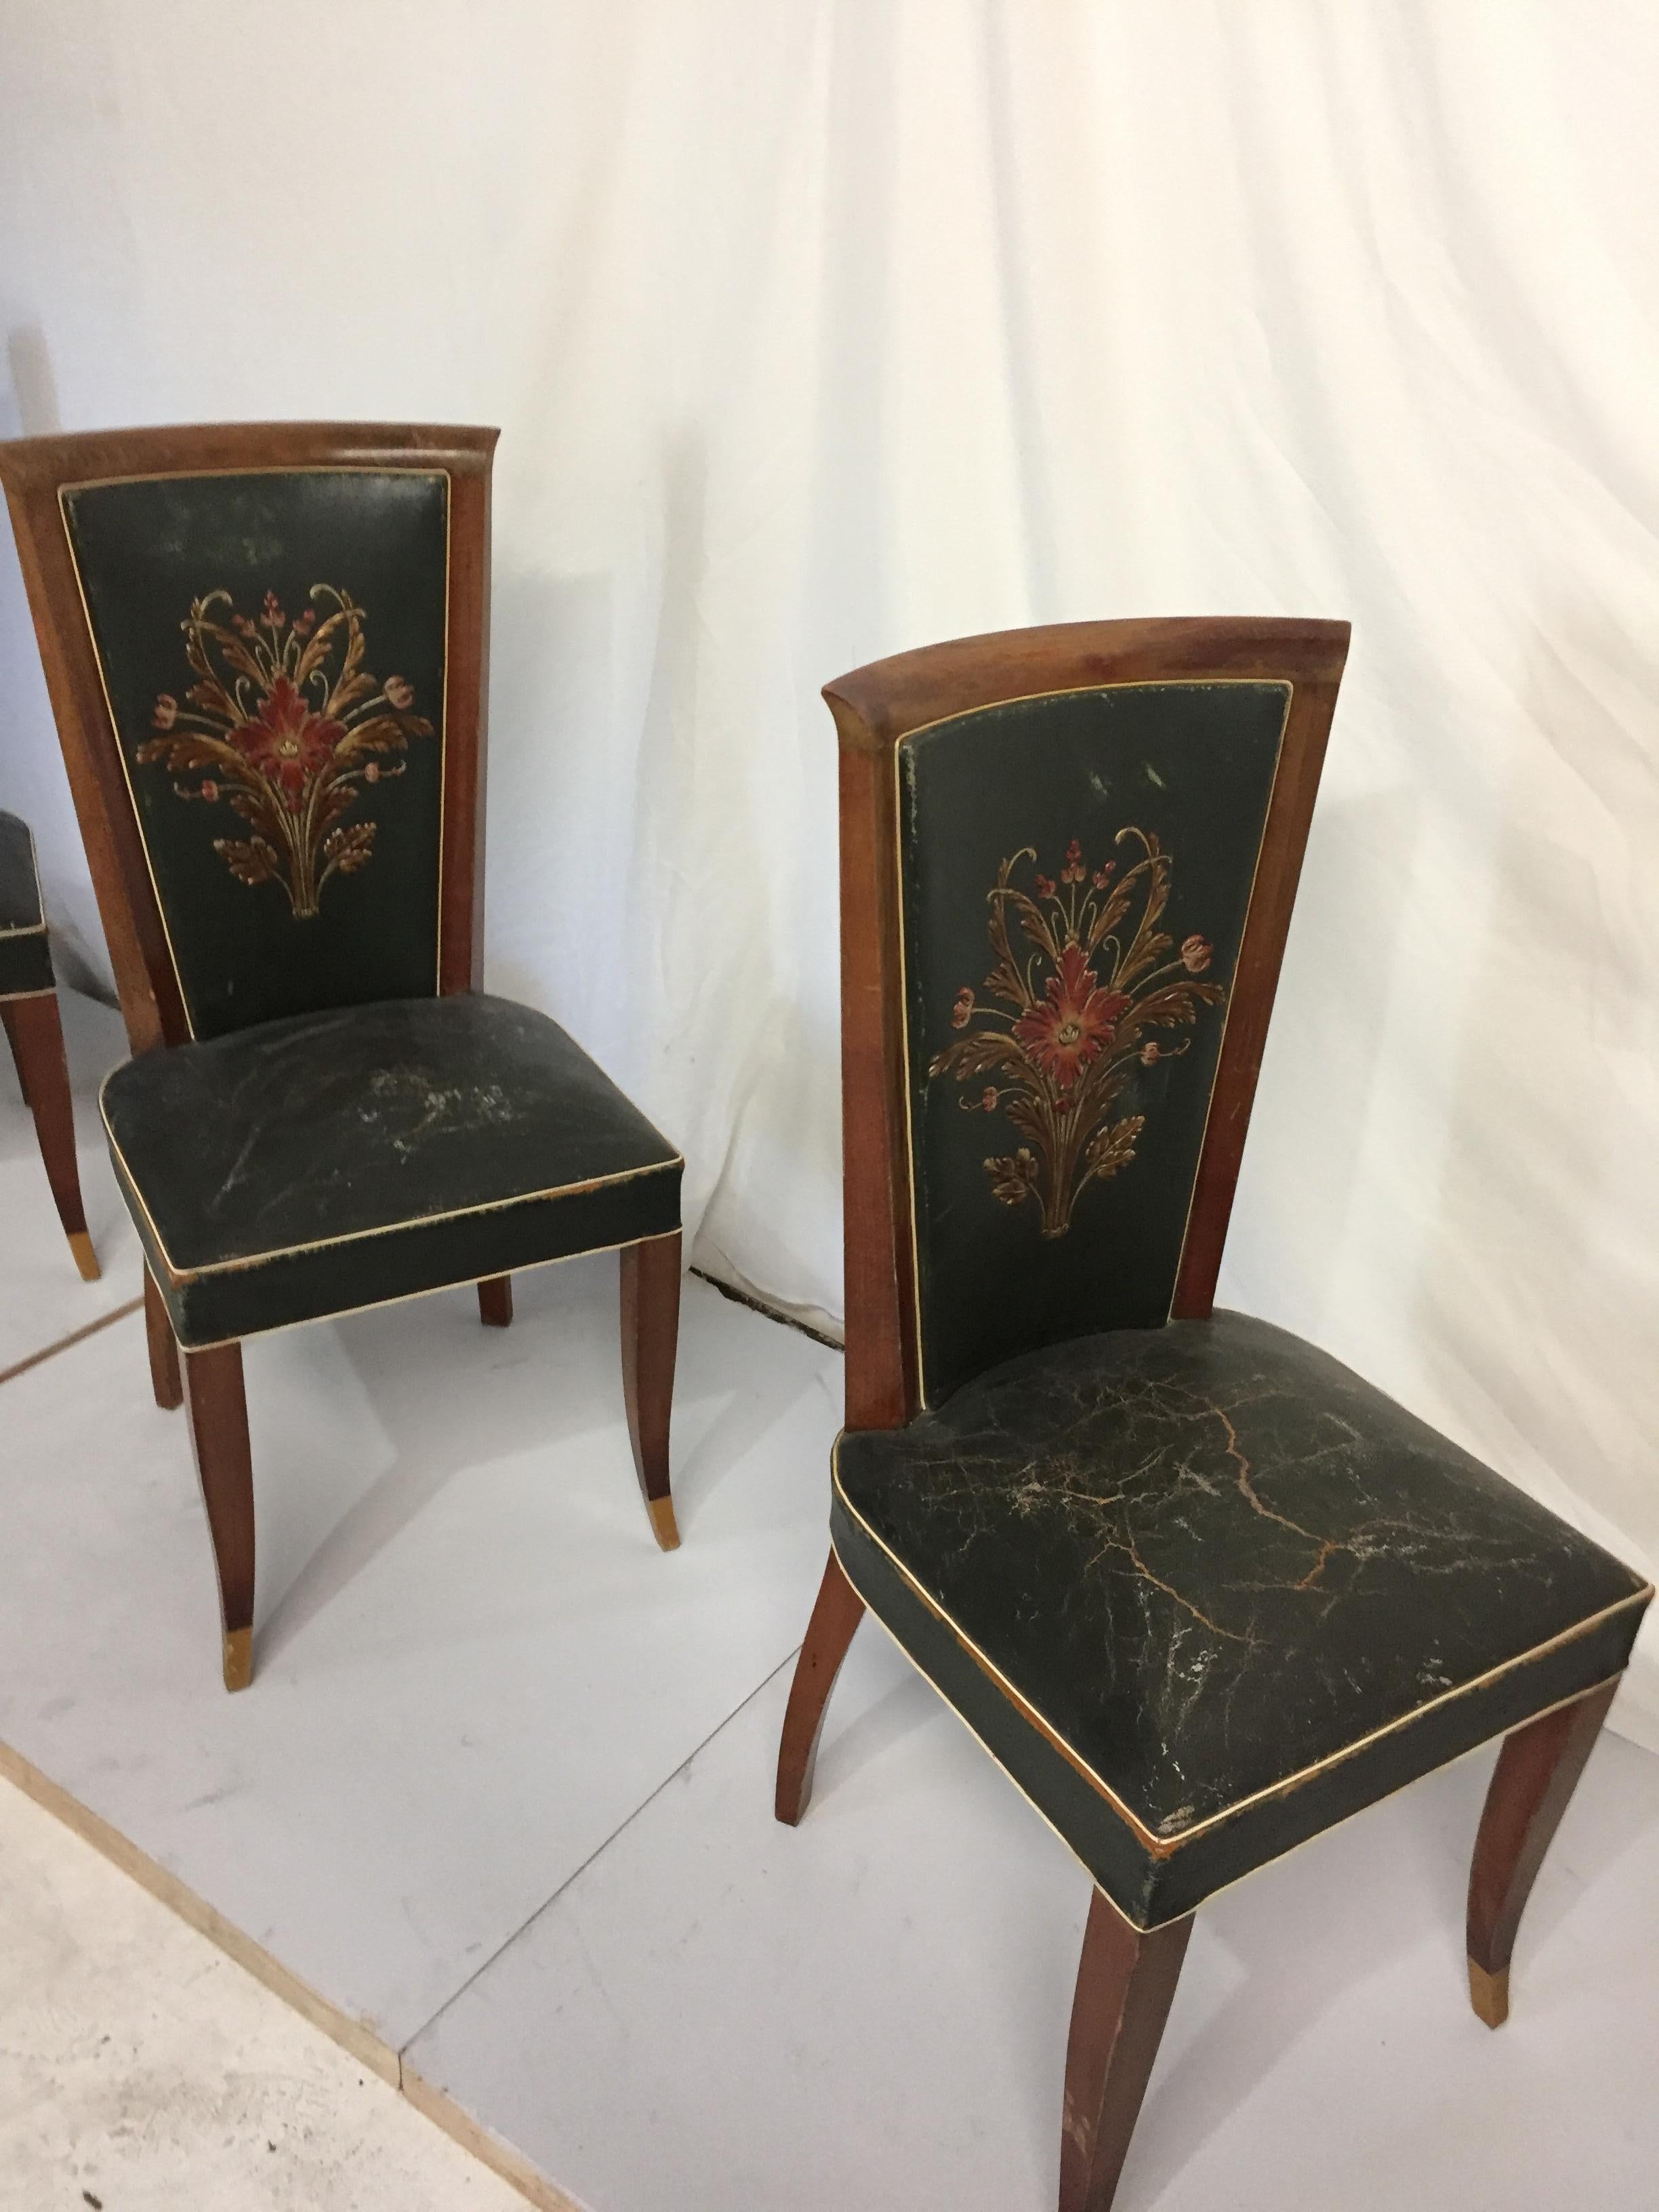 Six Art Deco Chairs in Green Leather Original Condition For Sale 2